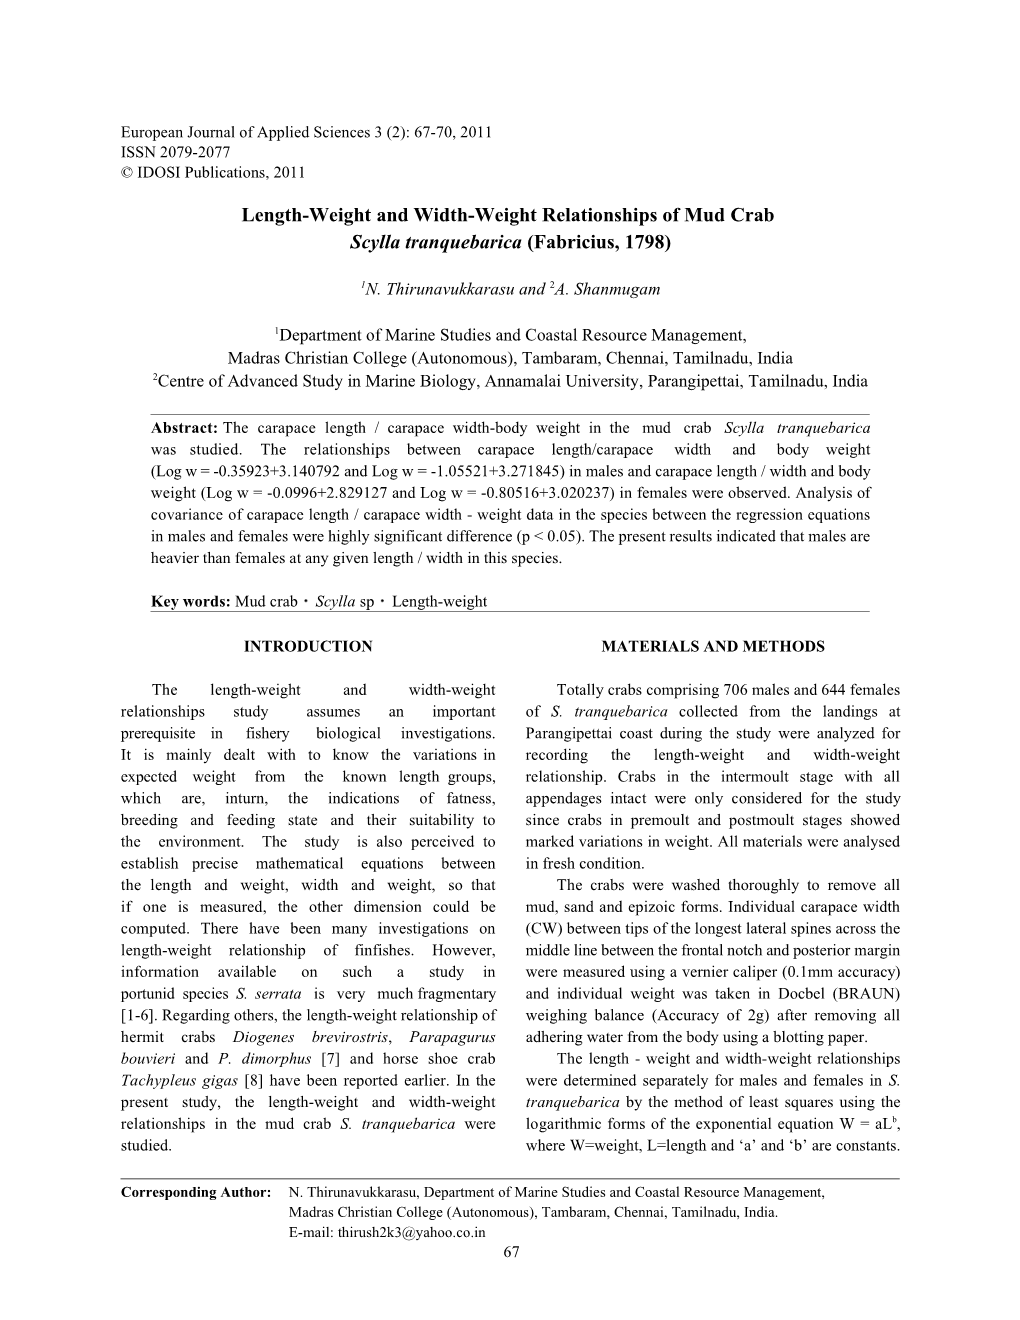 Length-Weight and Width-Weight Relationships of Mud Crab Scylla Tranquebarica (Fabricius, 1798)